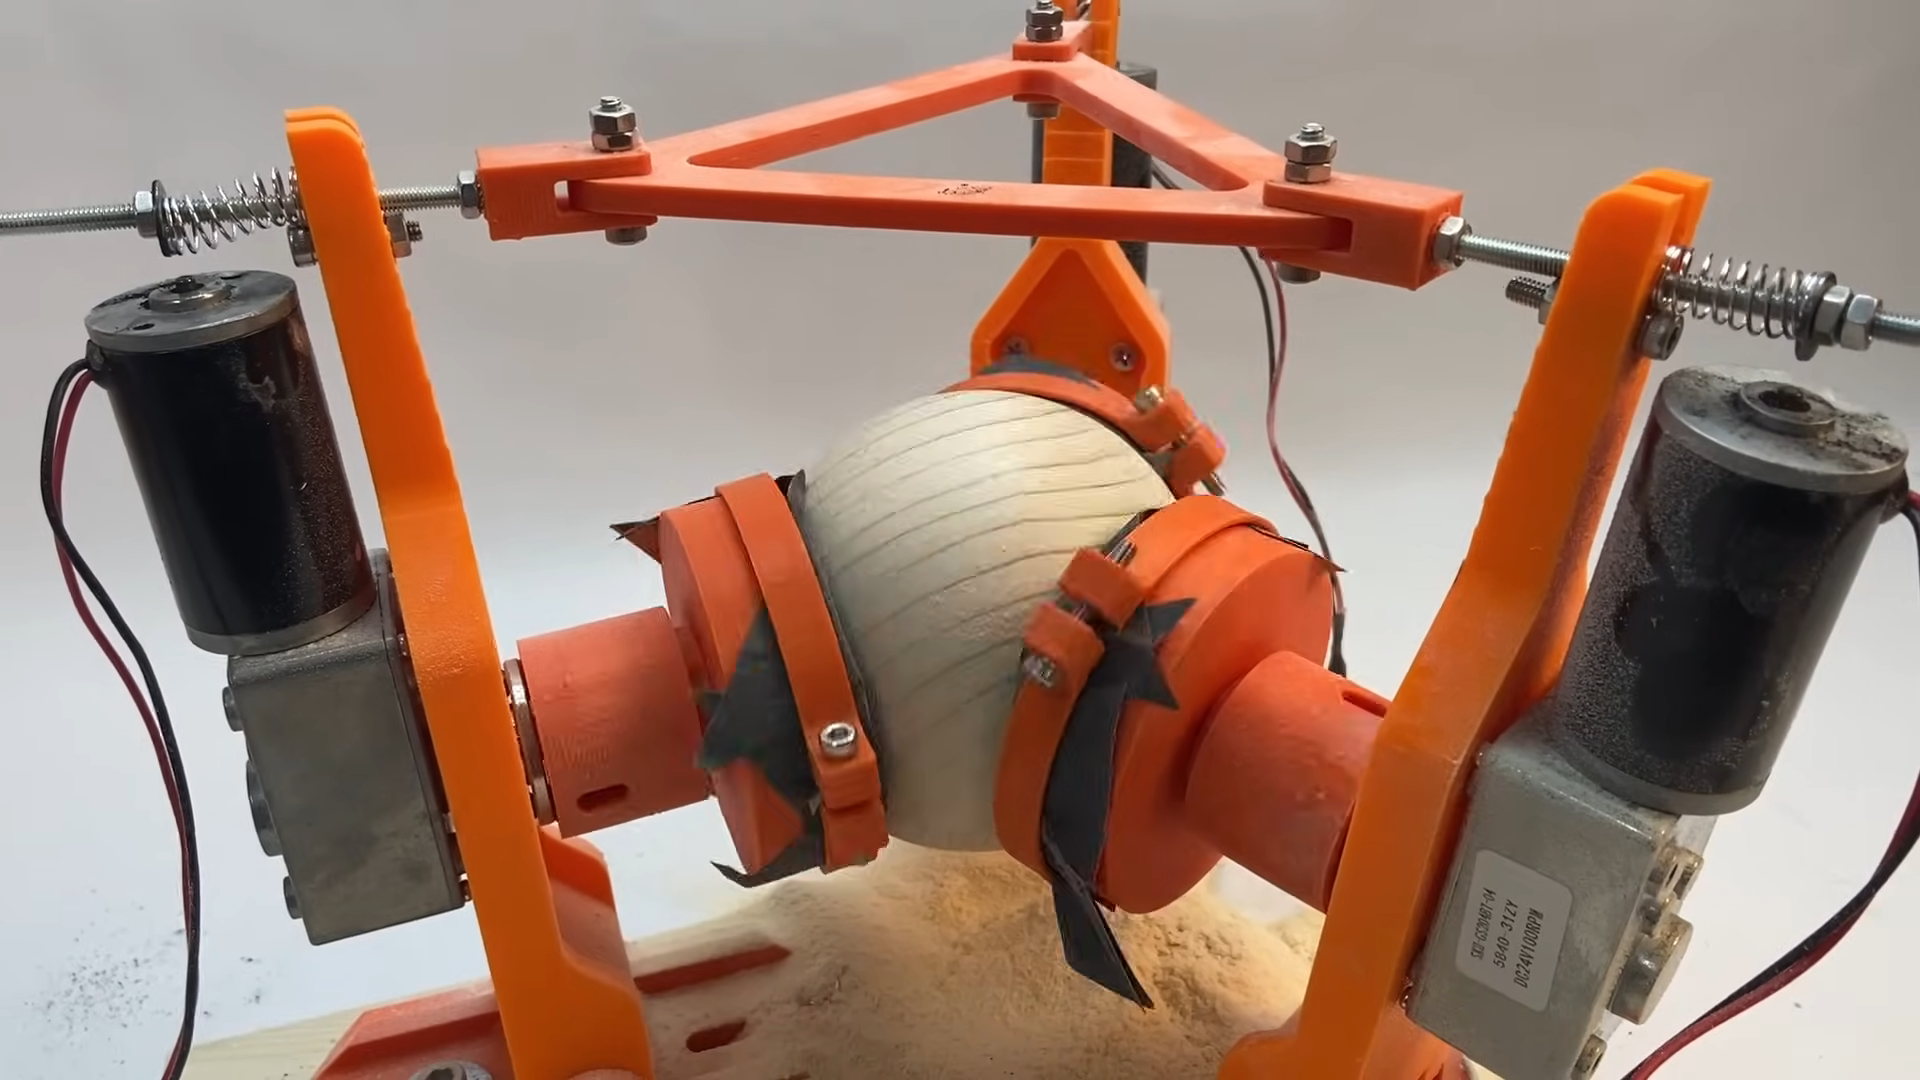 Have fun with this 3D printed sphere making machine